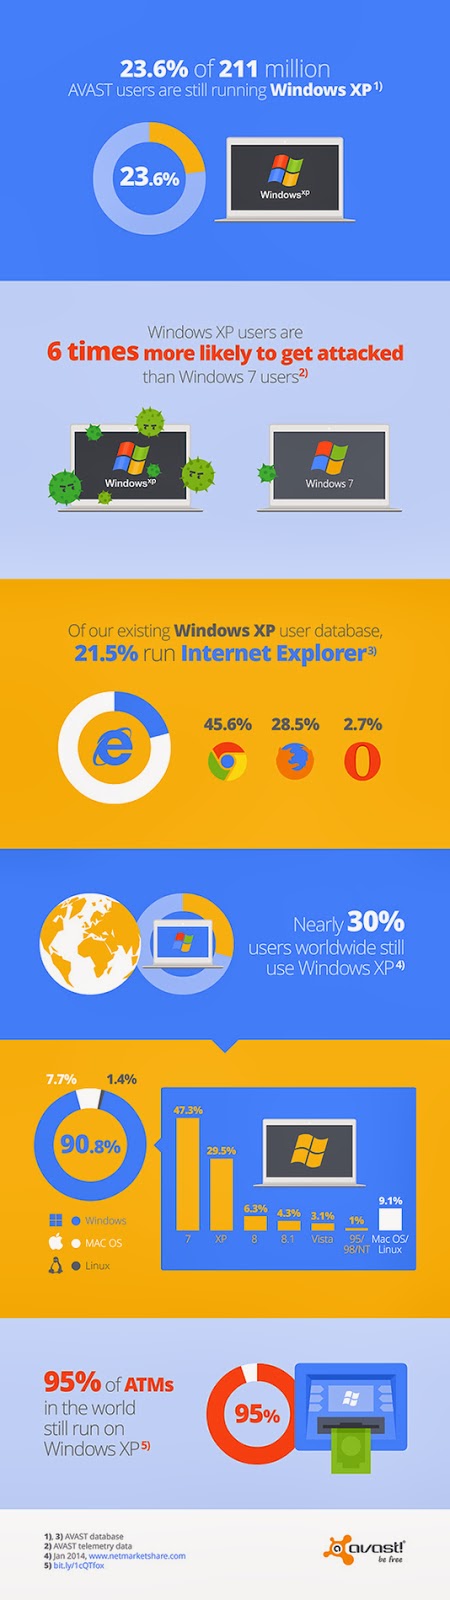 What avast wanna say about current usage of Windows XP?